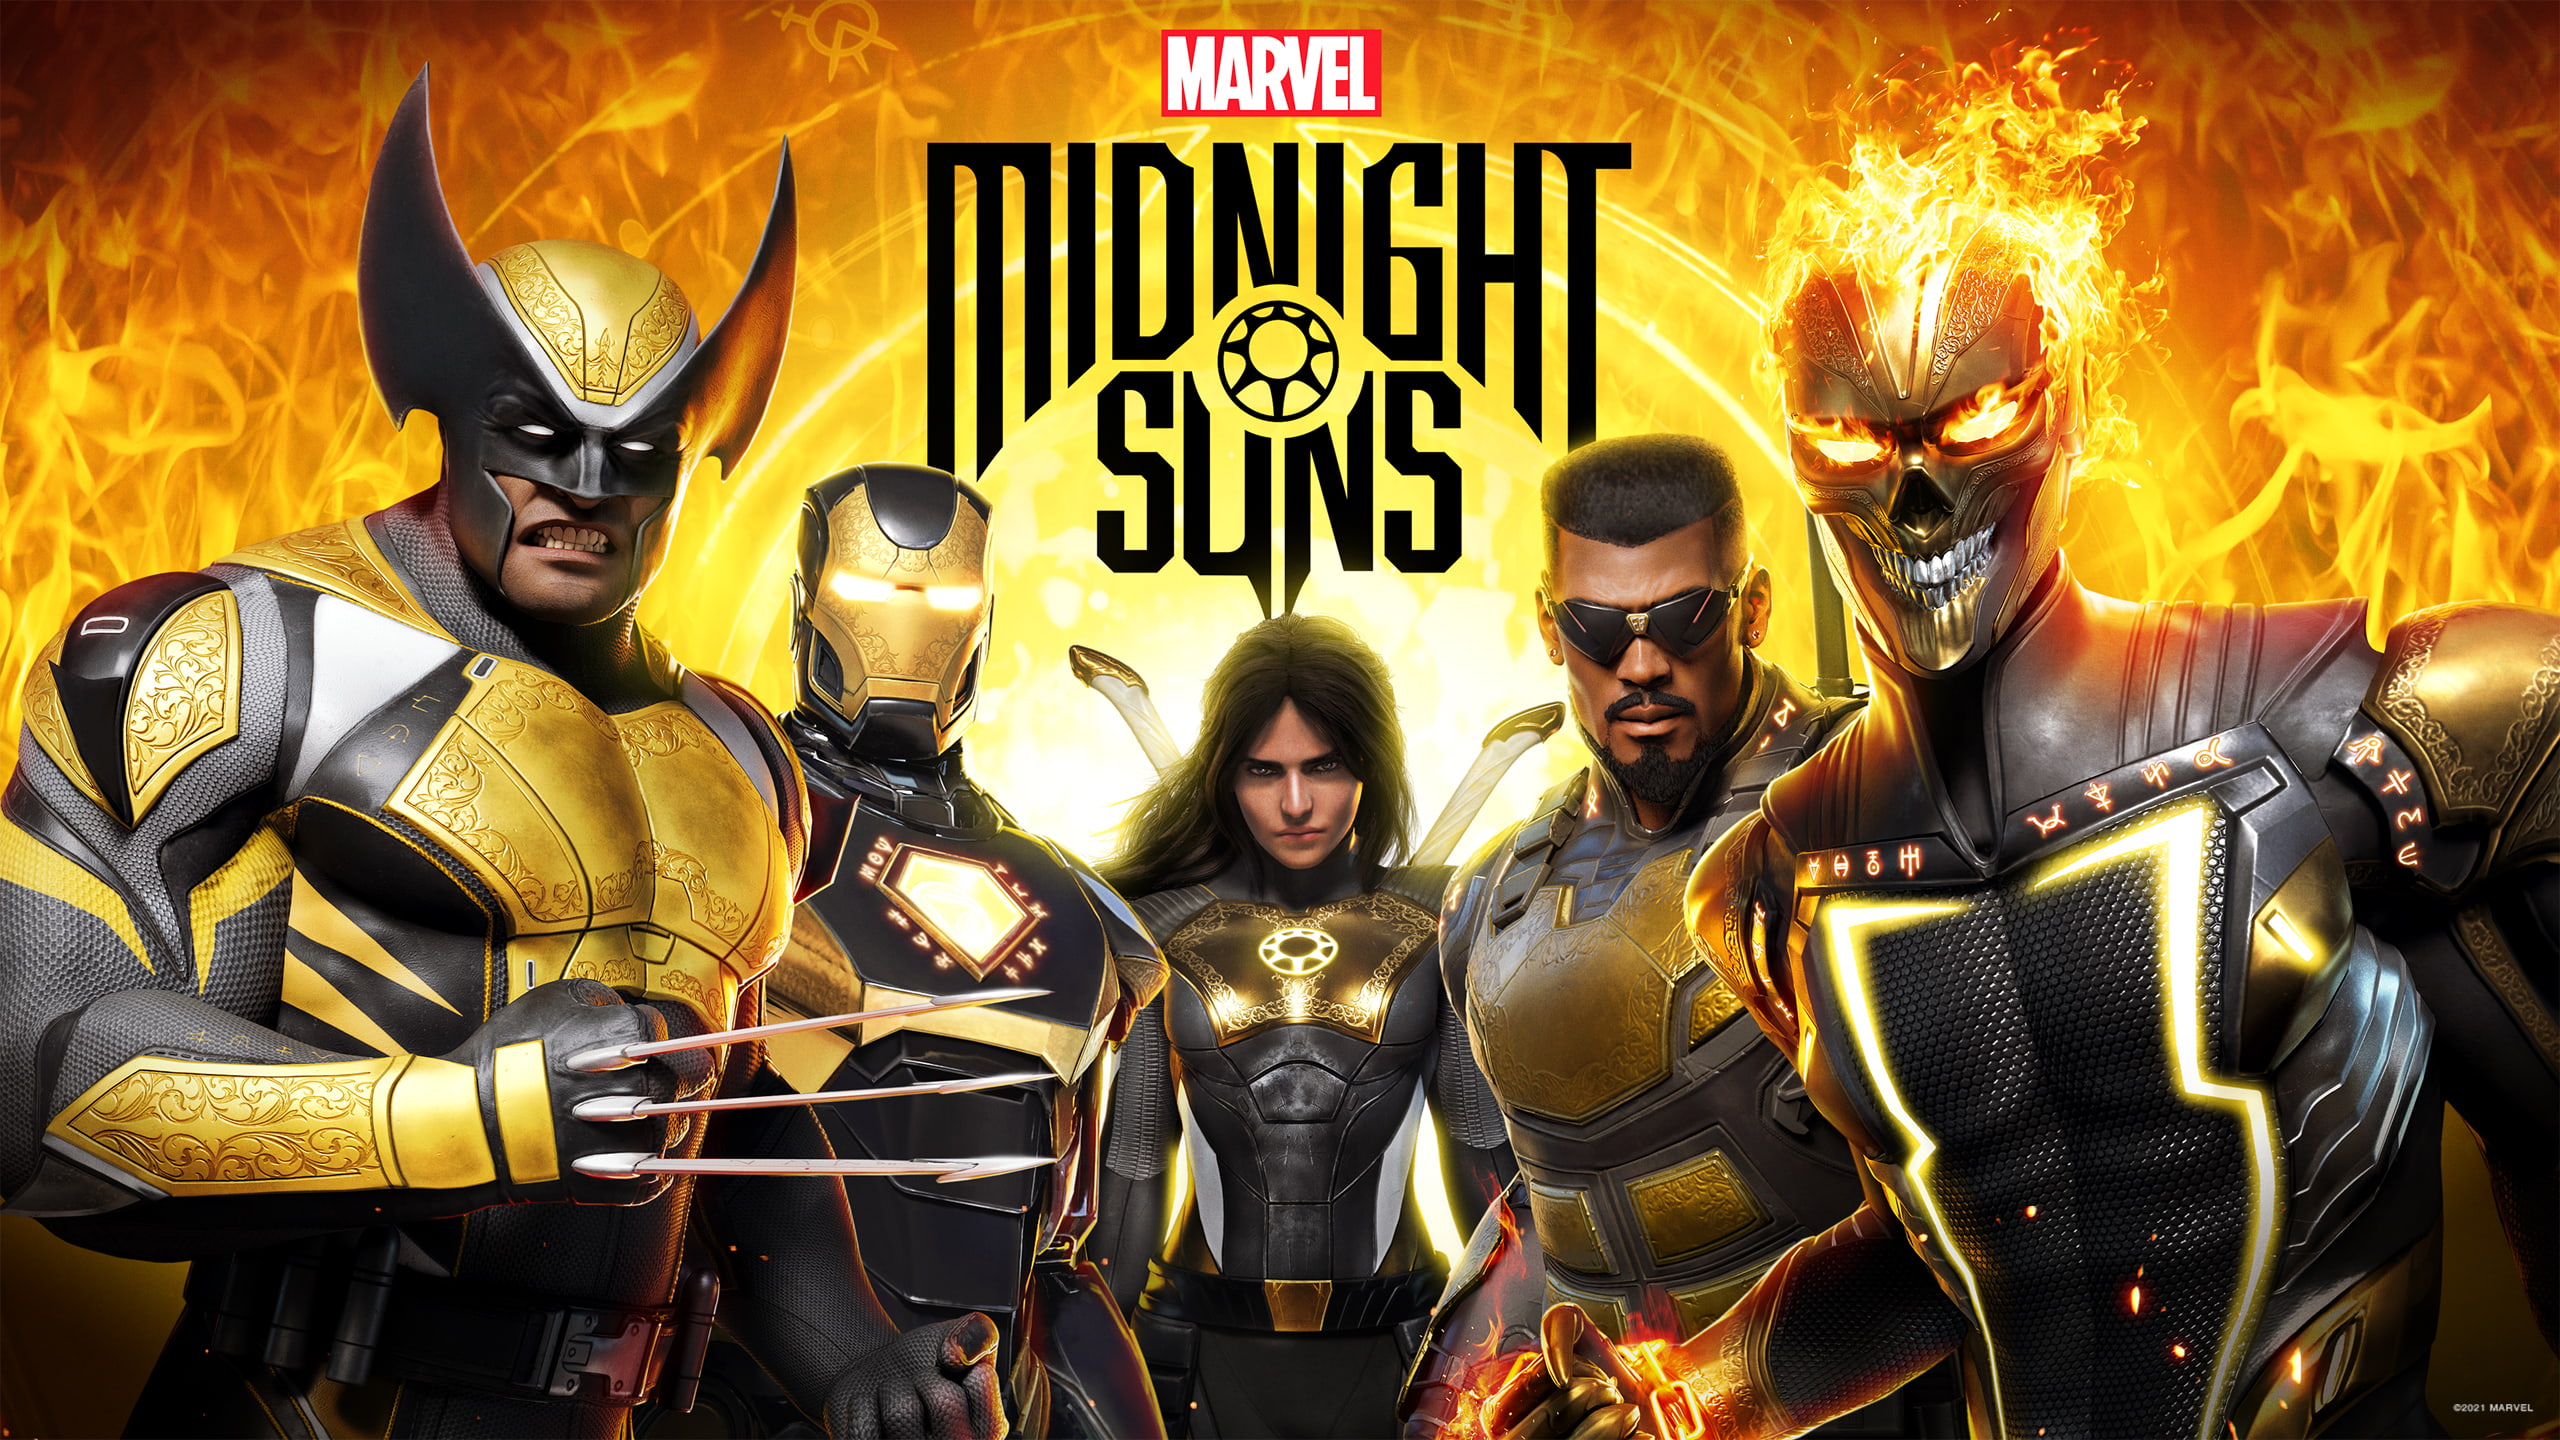 Marvel's Midnight Suns may be releasing soon